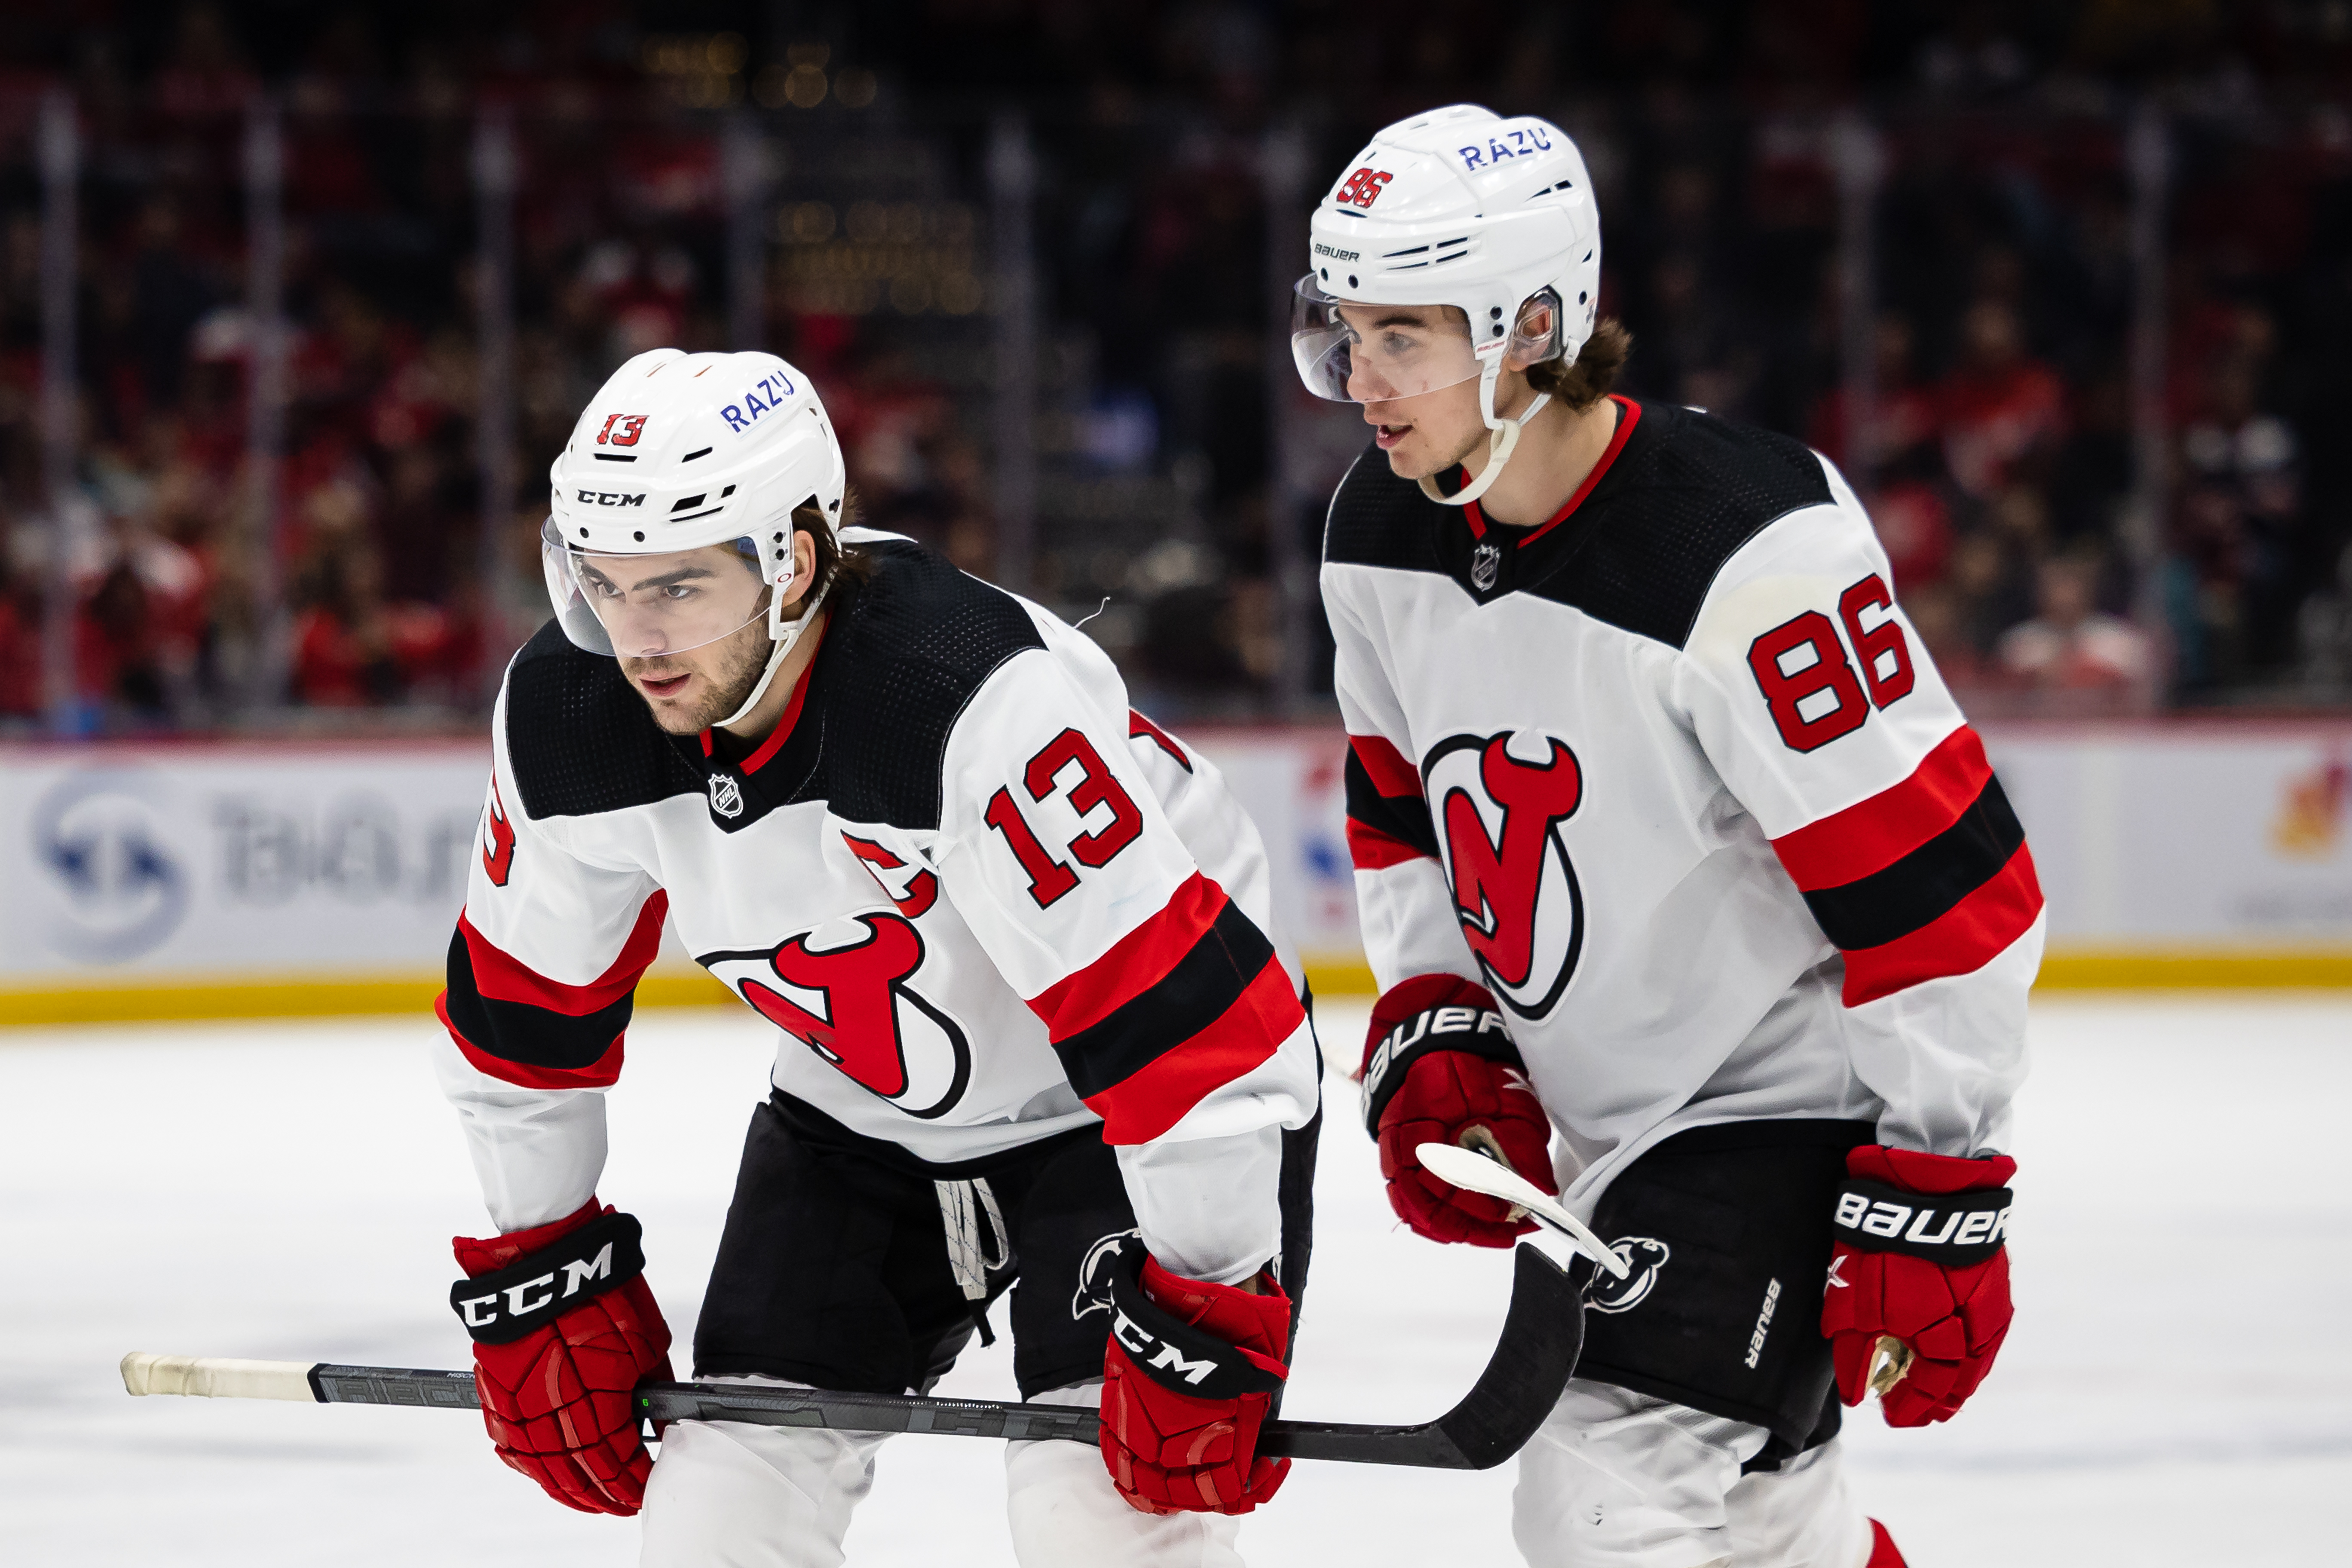 Devils re-sign centre Zacha to 3-year, $6.75 million deal